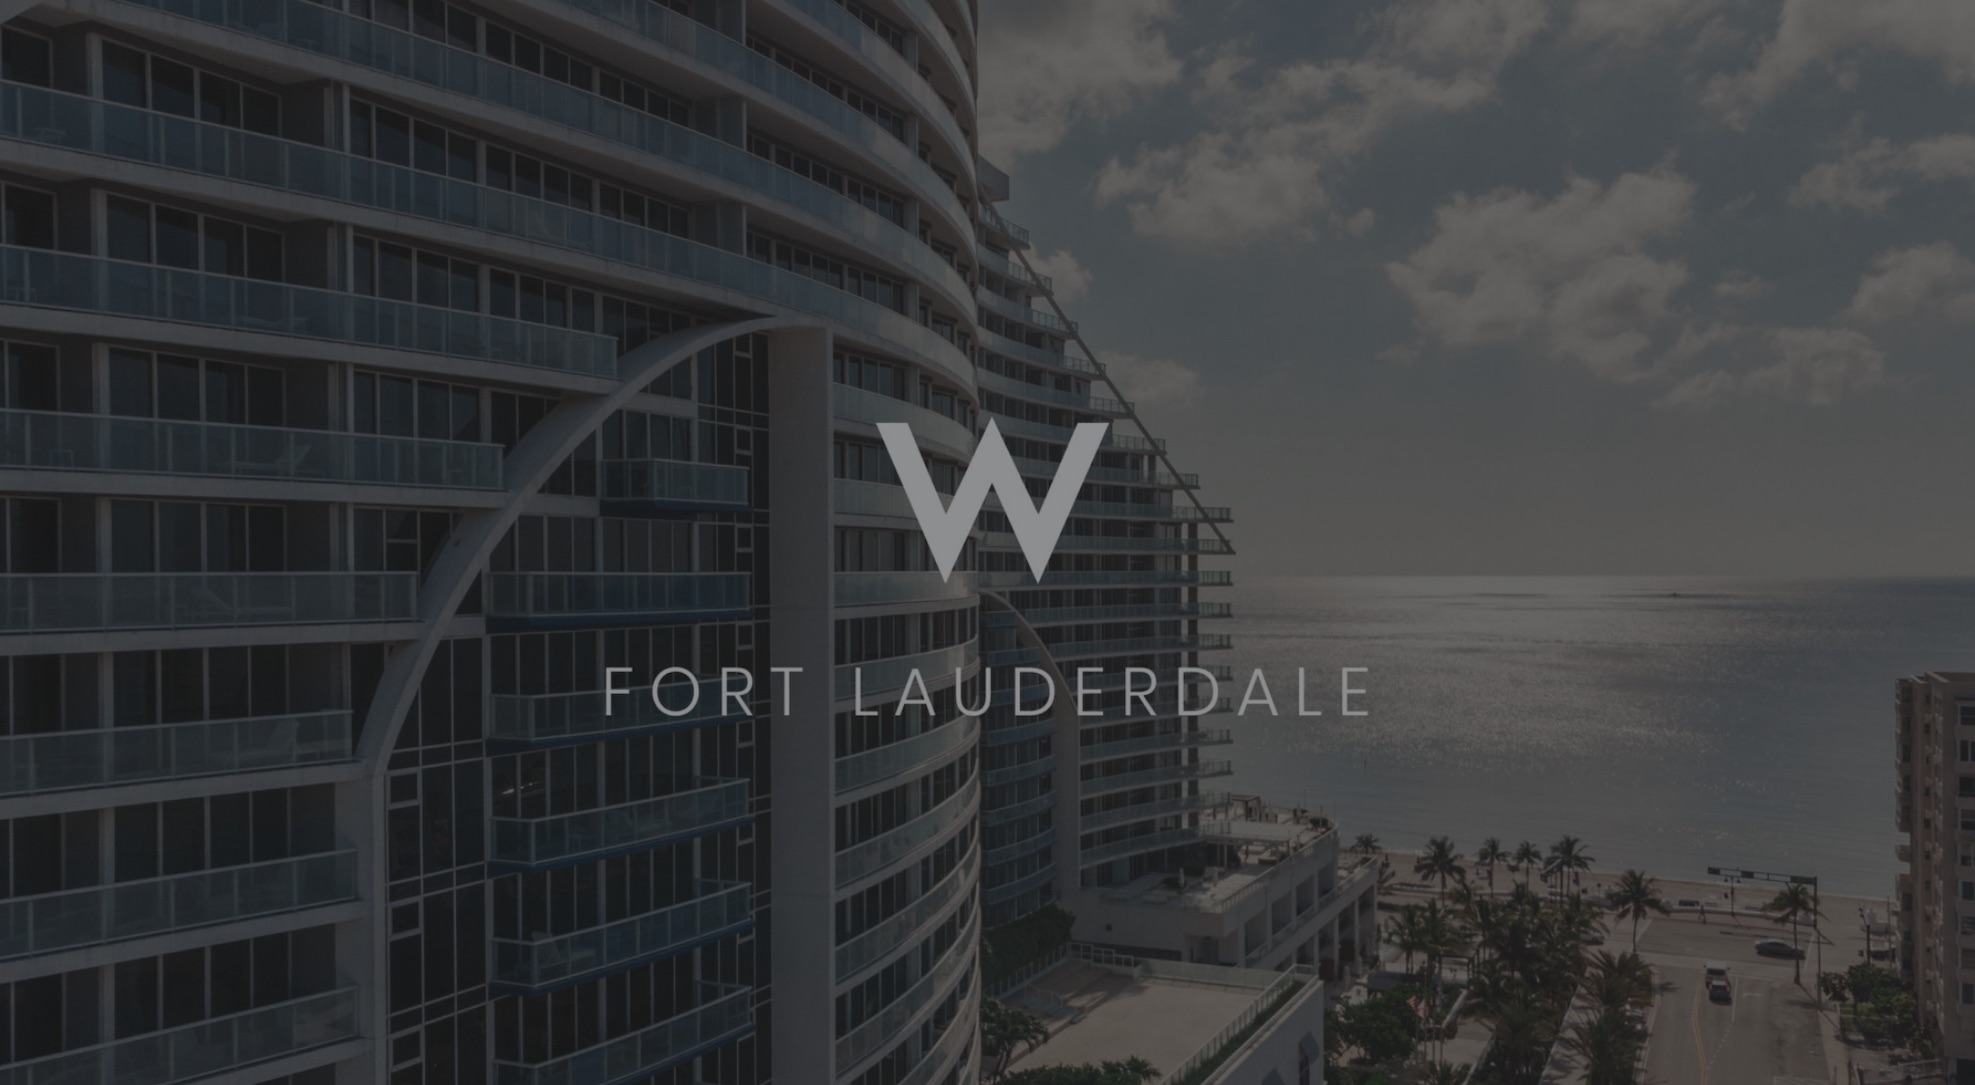 White West Fort Lauderdale Logo Social Media Marketing with dimmed background showing an apartment by a beach